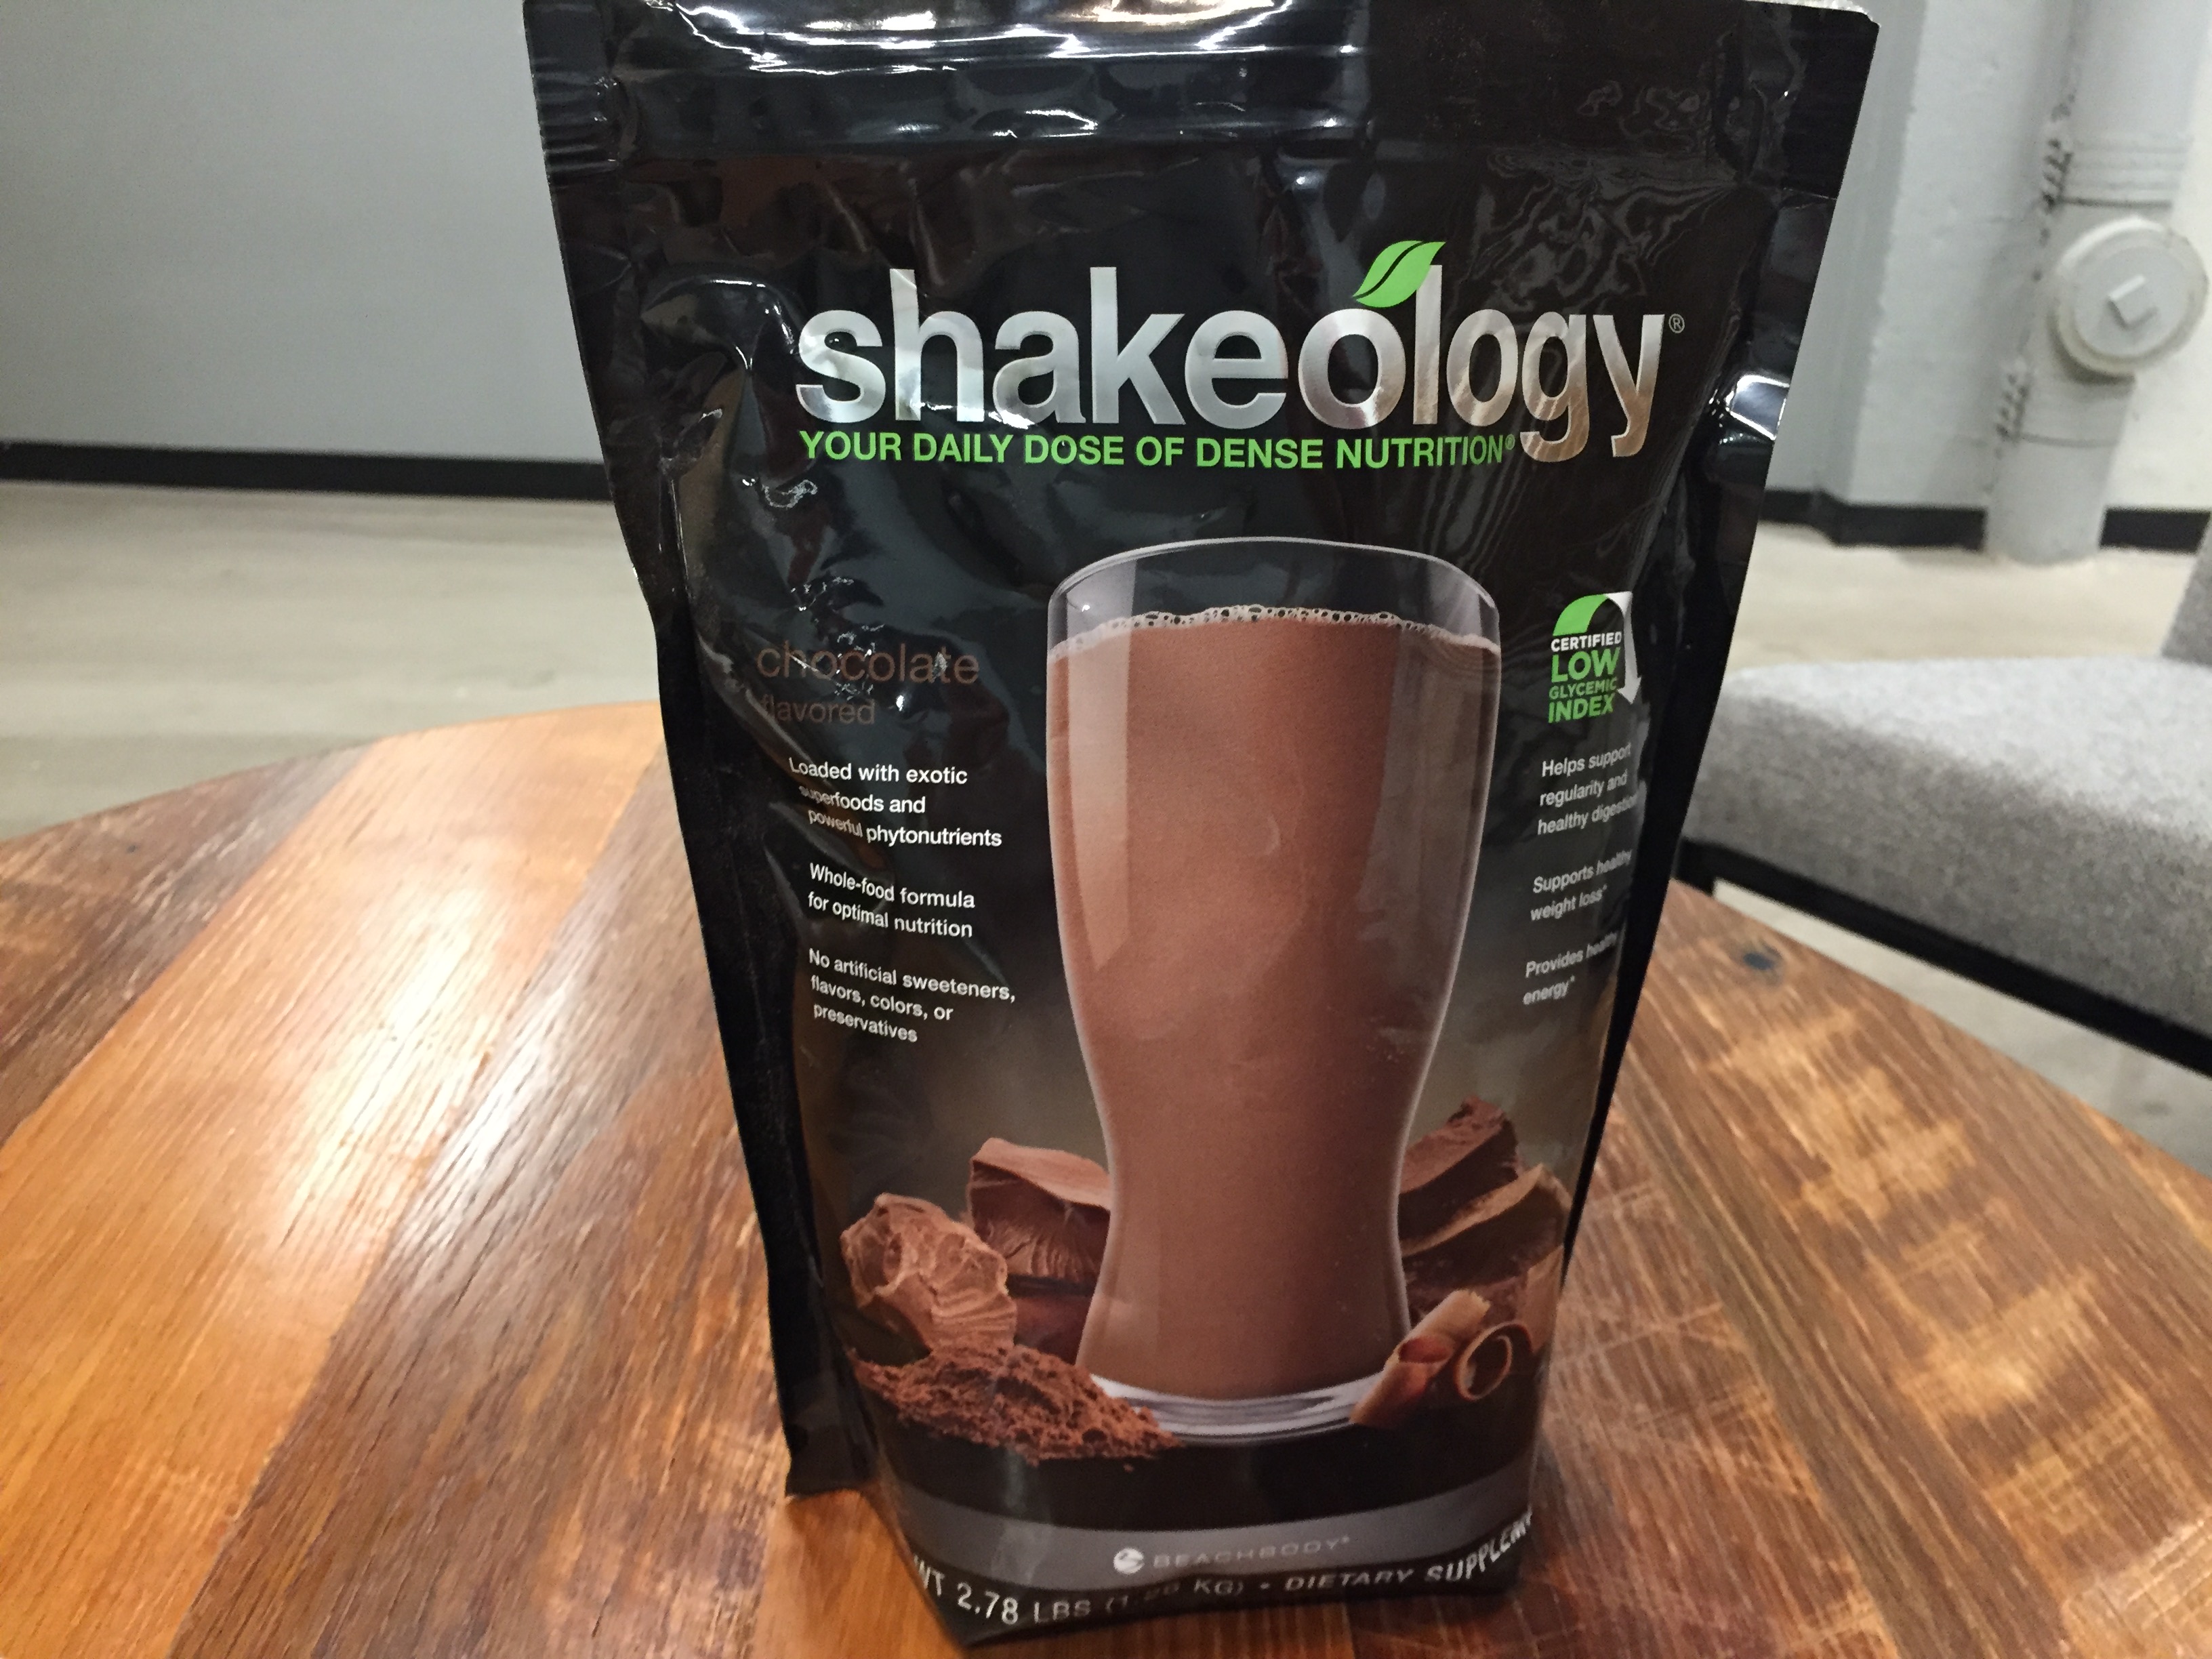 Getting The The Green Way - Shakeology - By Beachbody - Facebook To Work